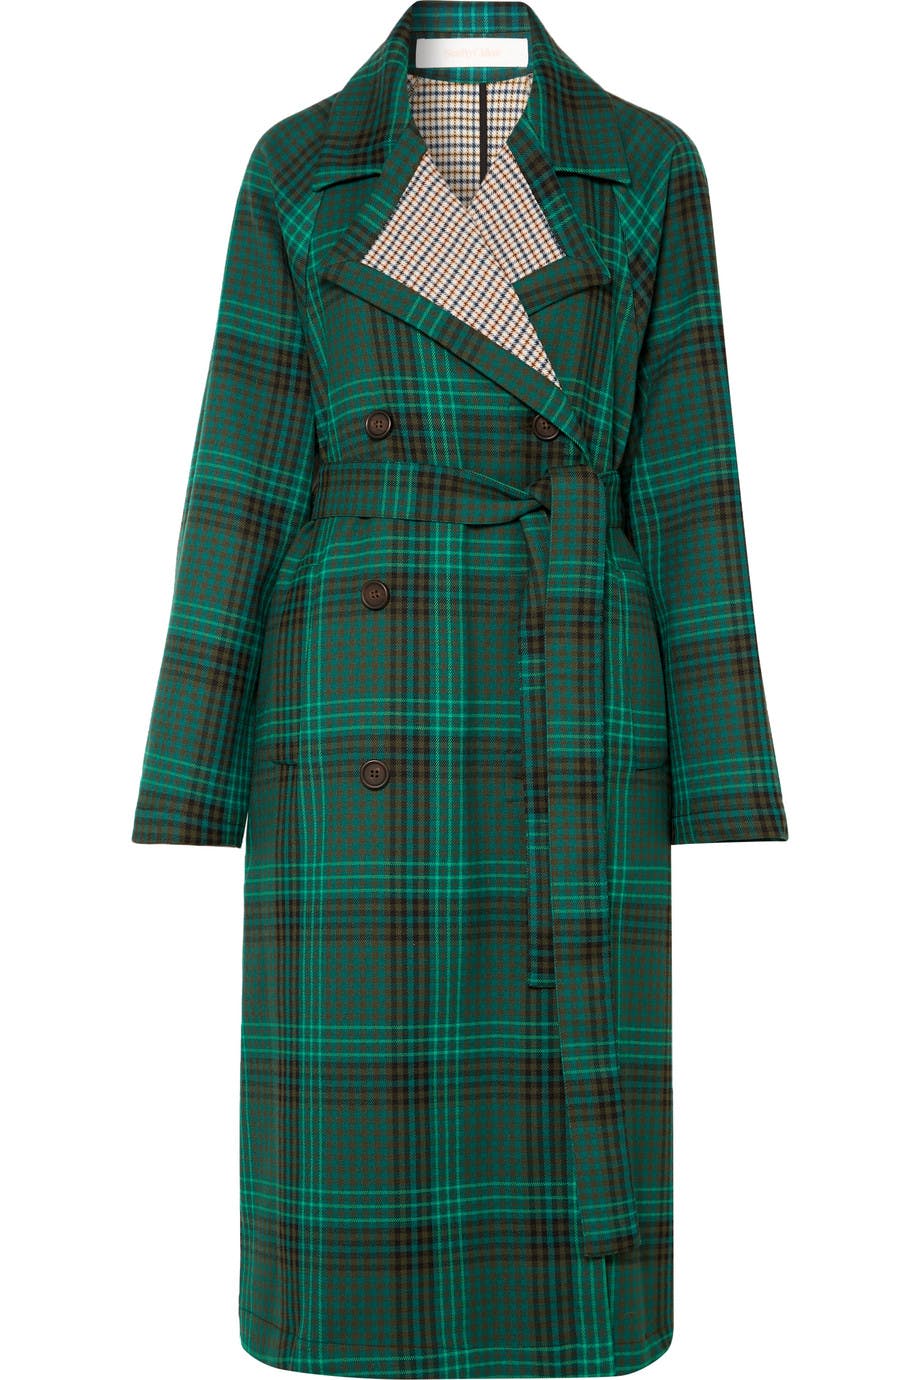 Best colourful check coats for winter